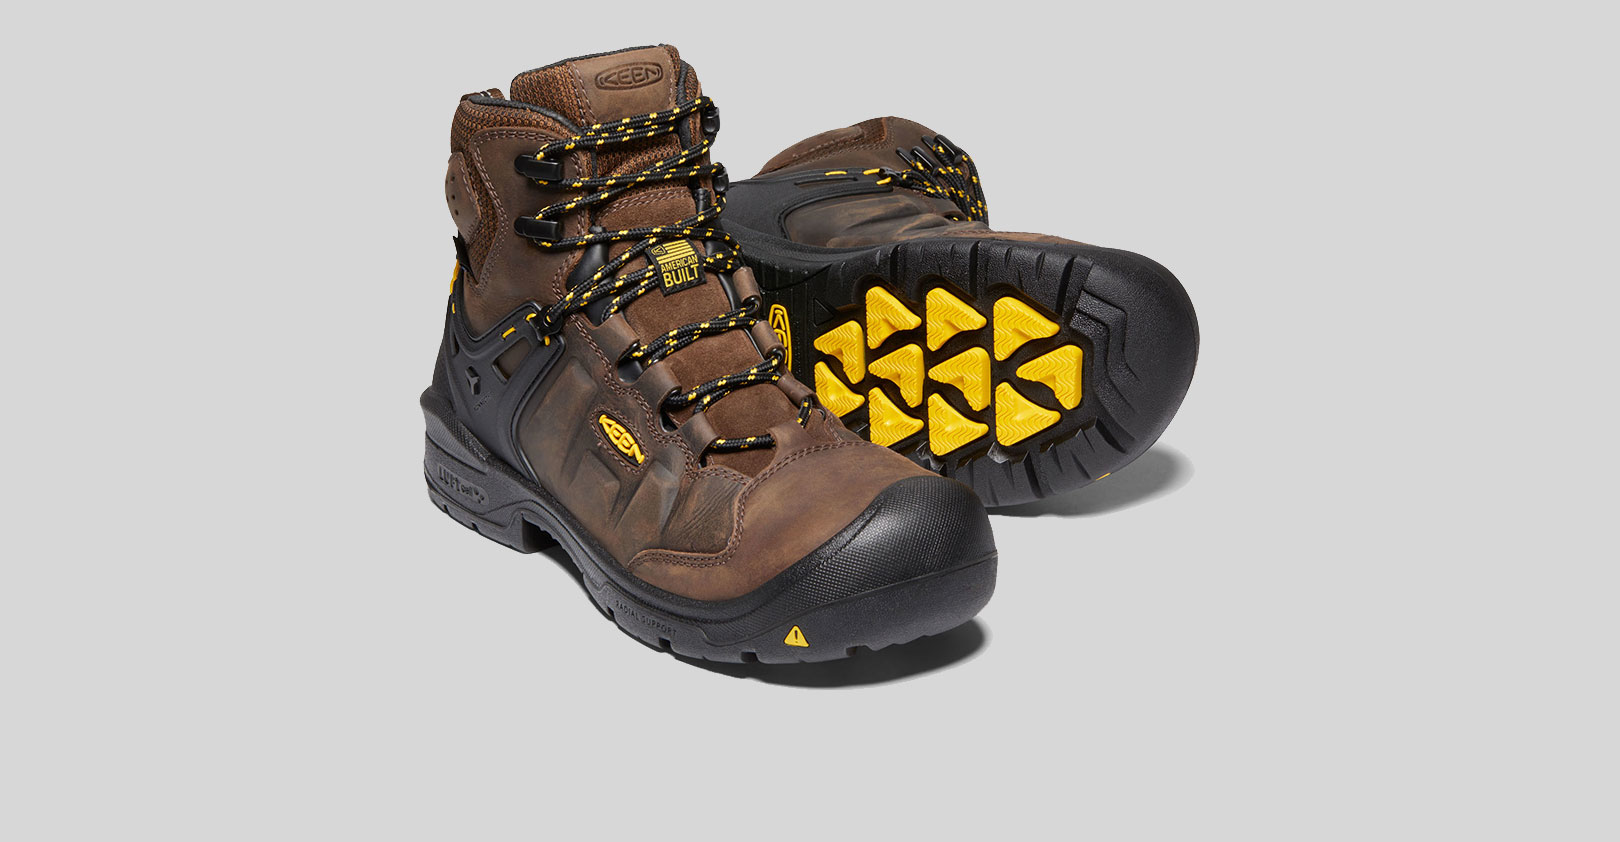 keen dover boots